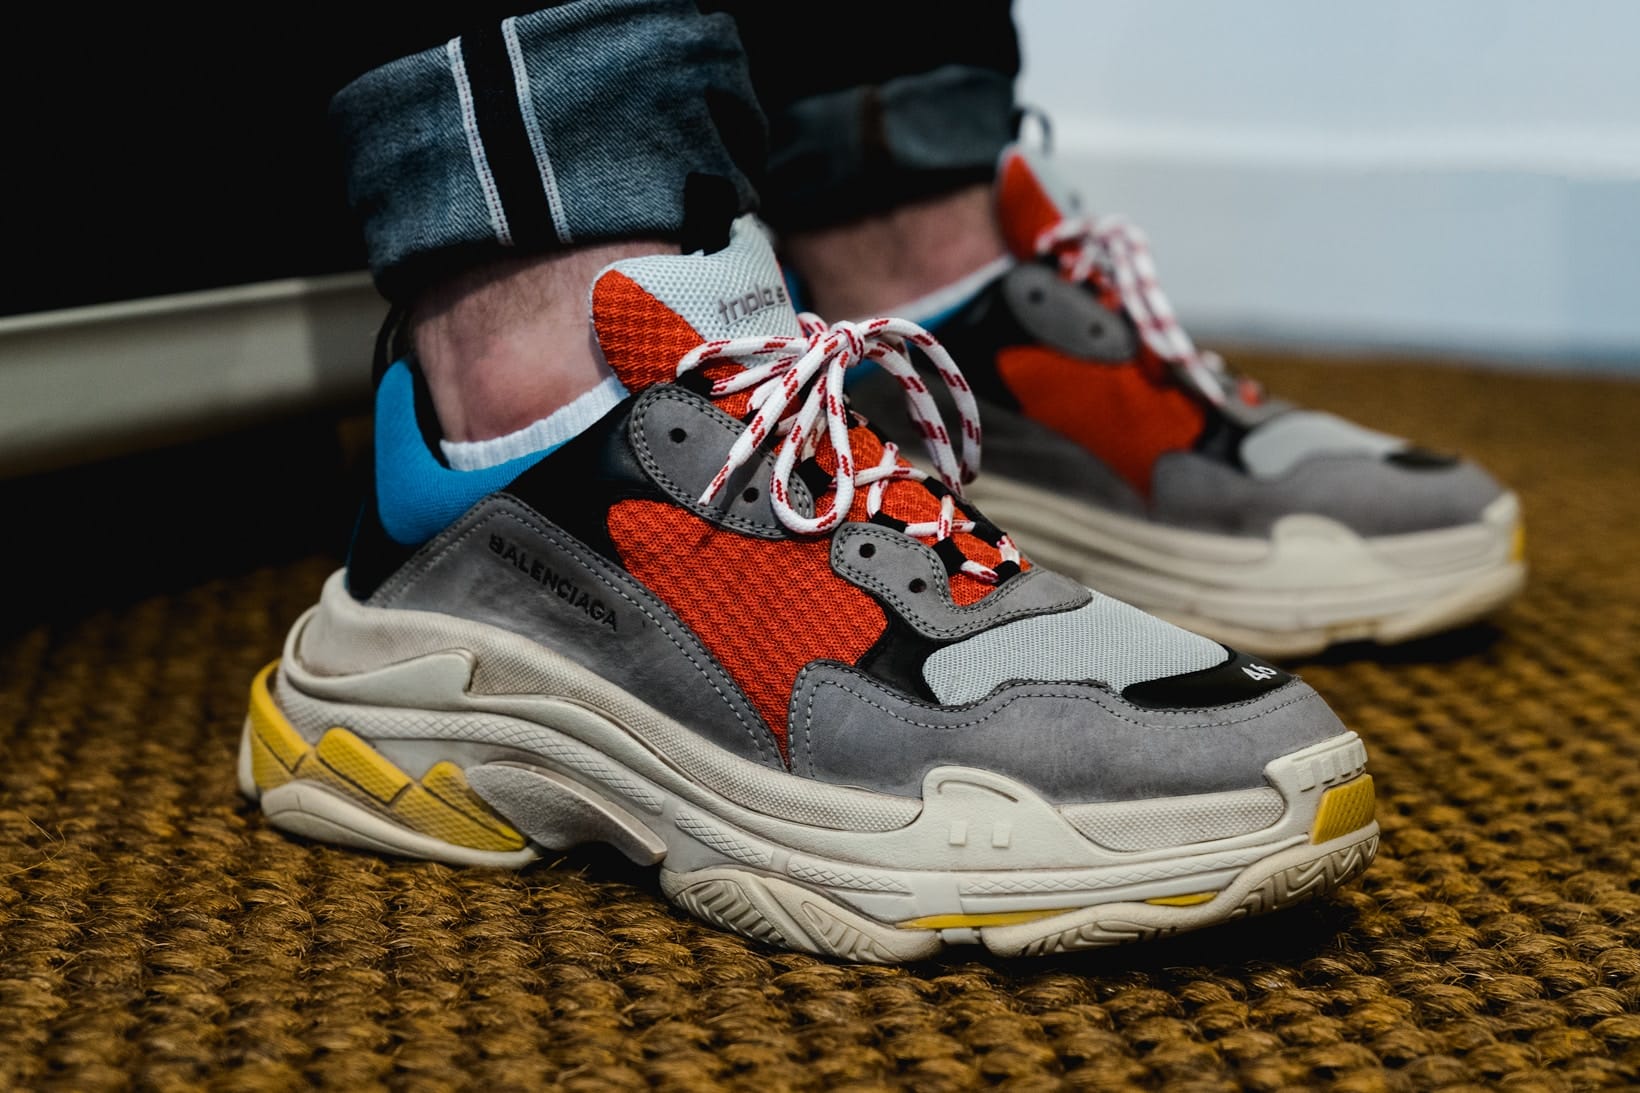 The Balenciaga Triple S Black White Red worn by the young